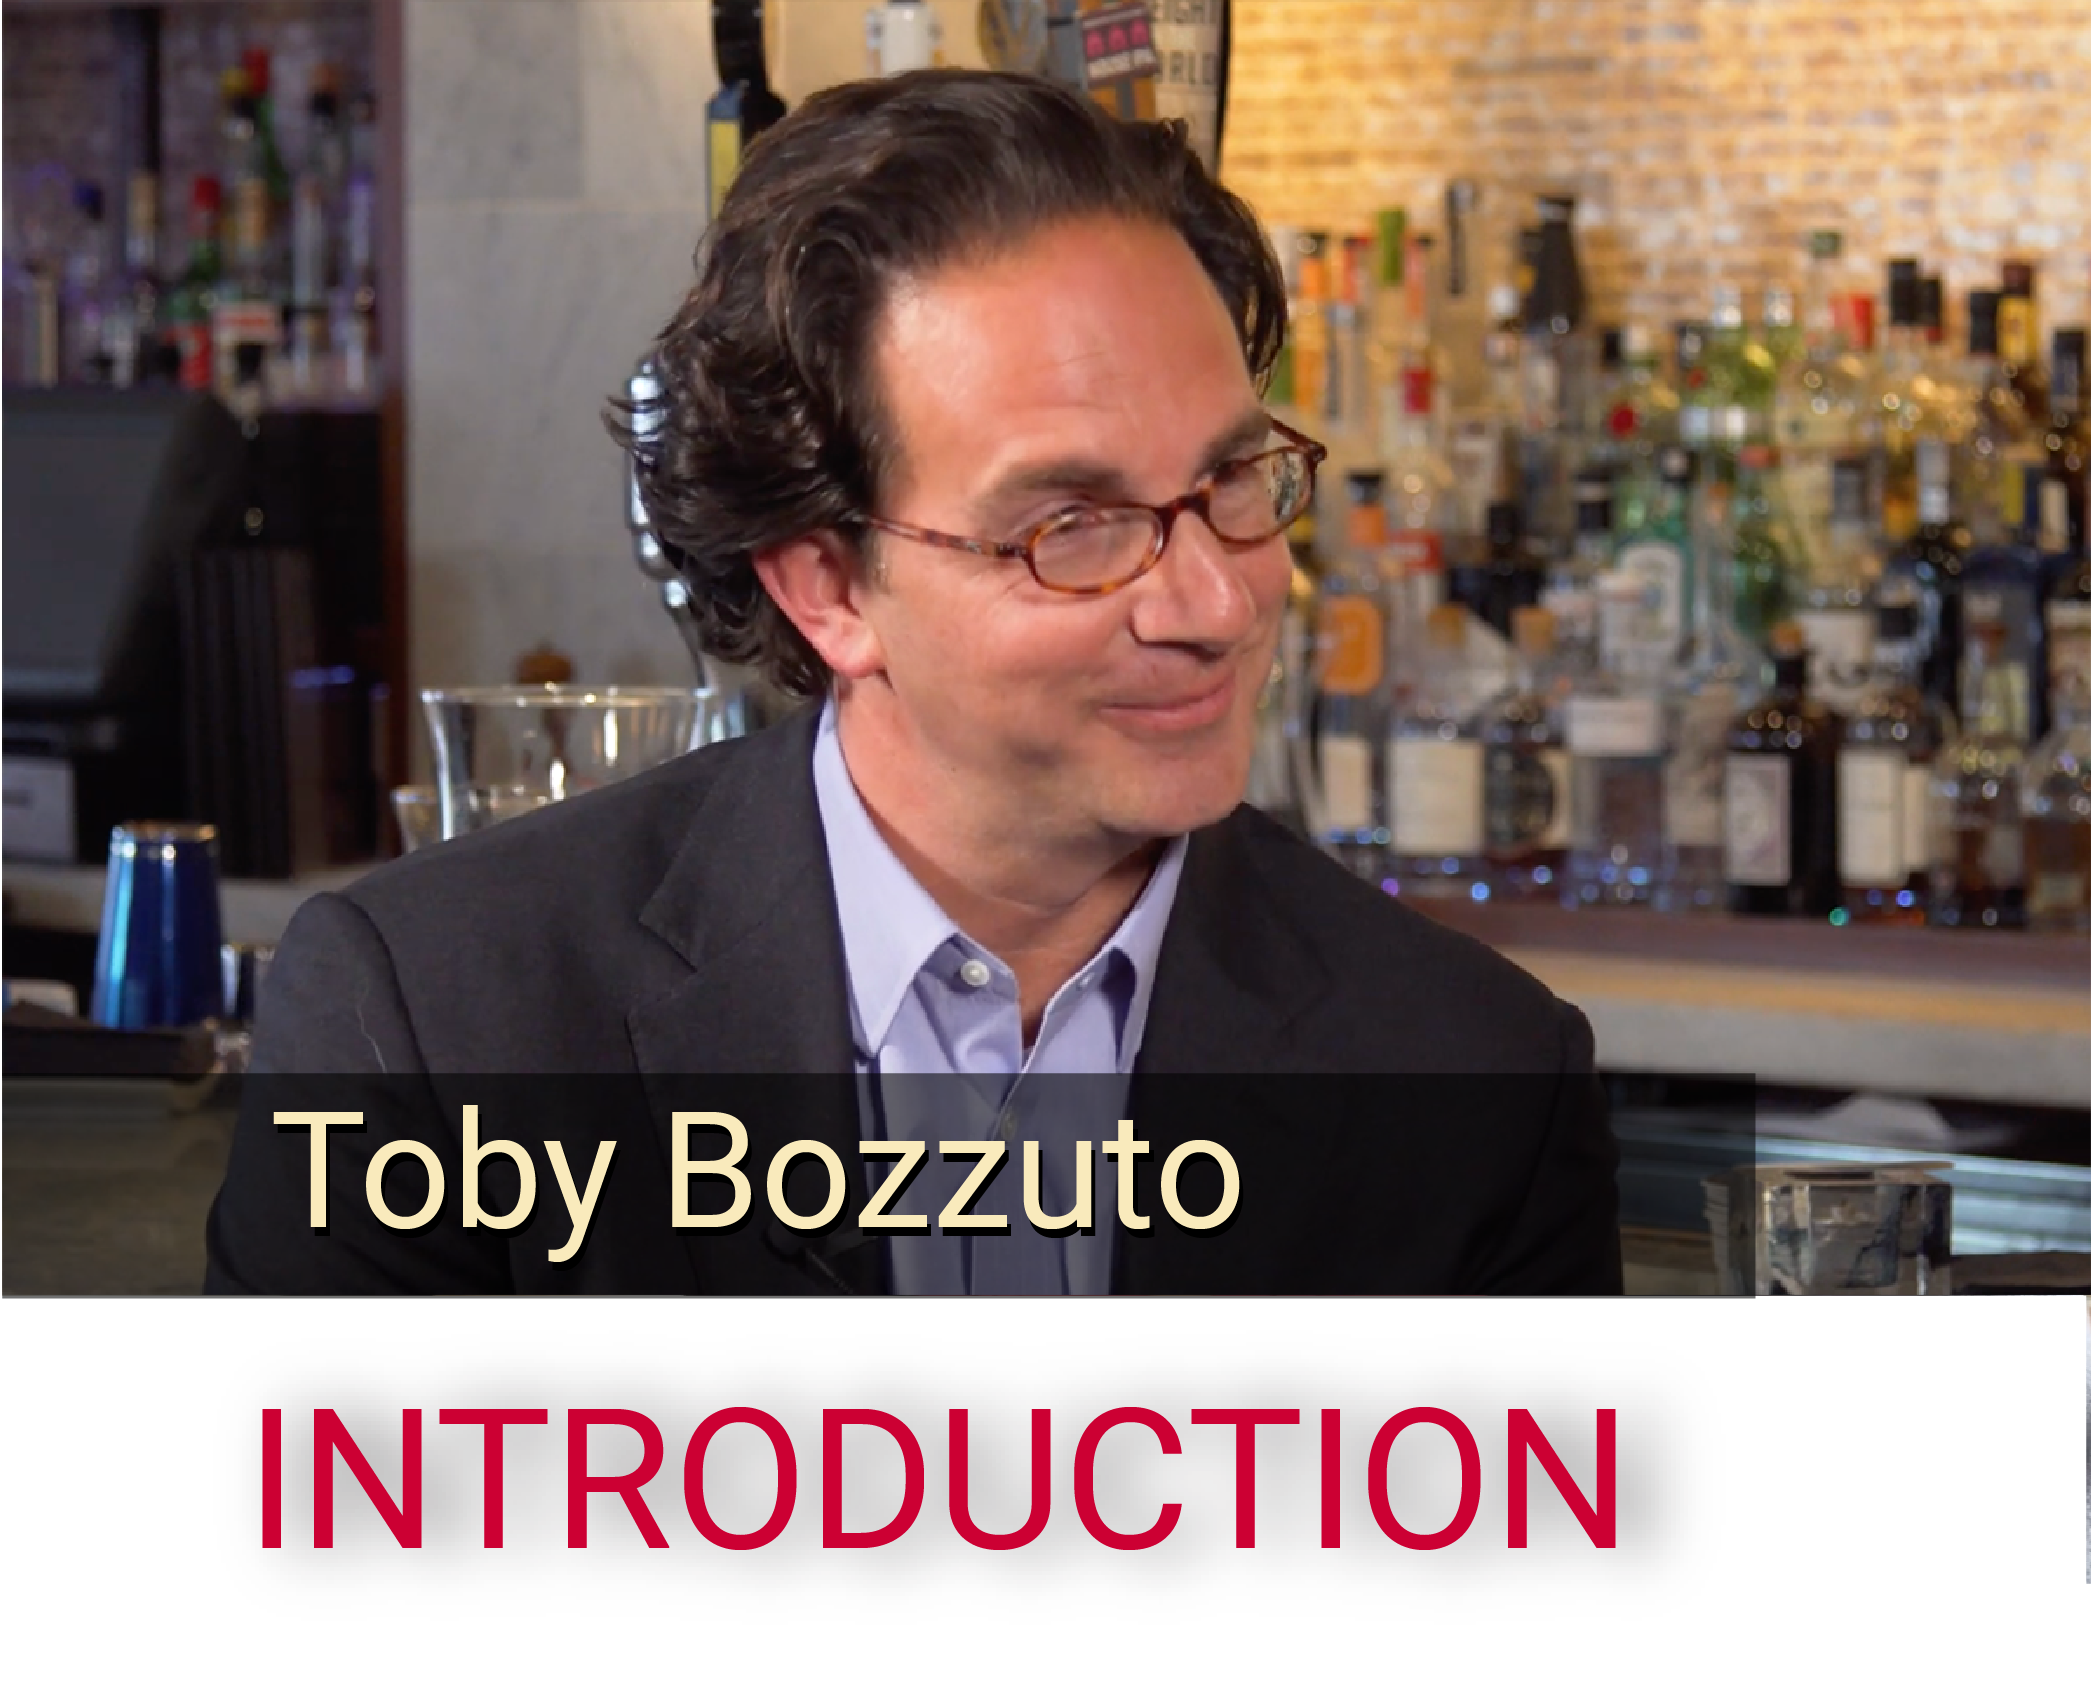 The first of three parts of an interview with Tony Bozzuto